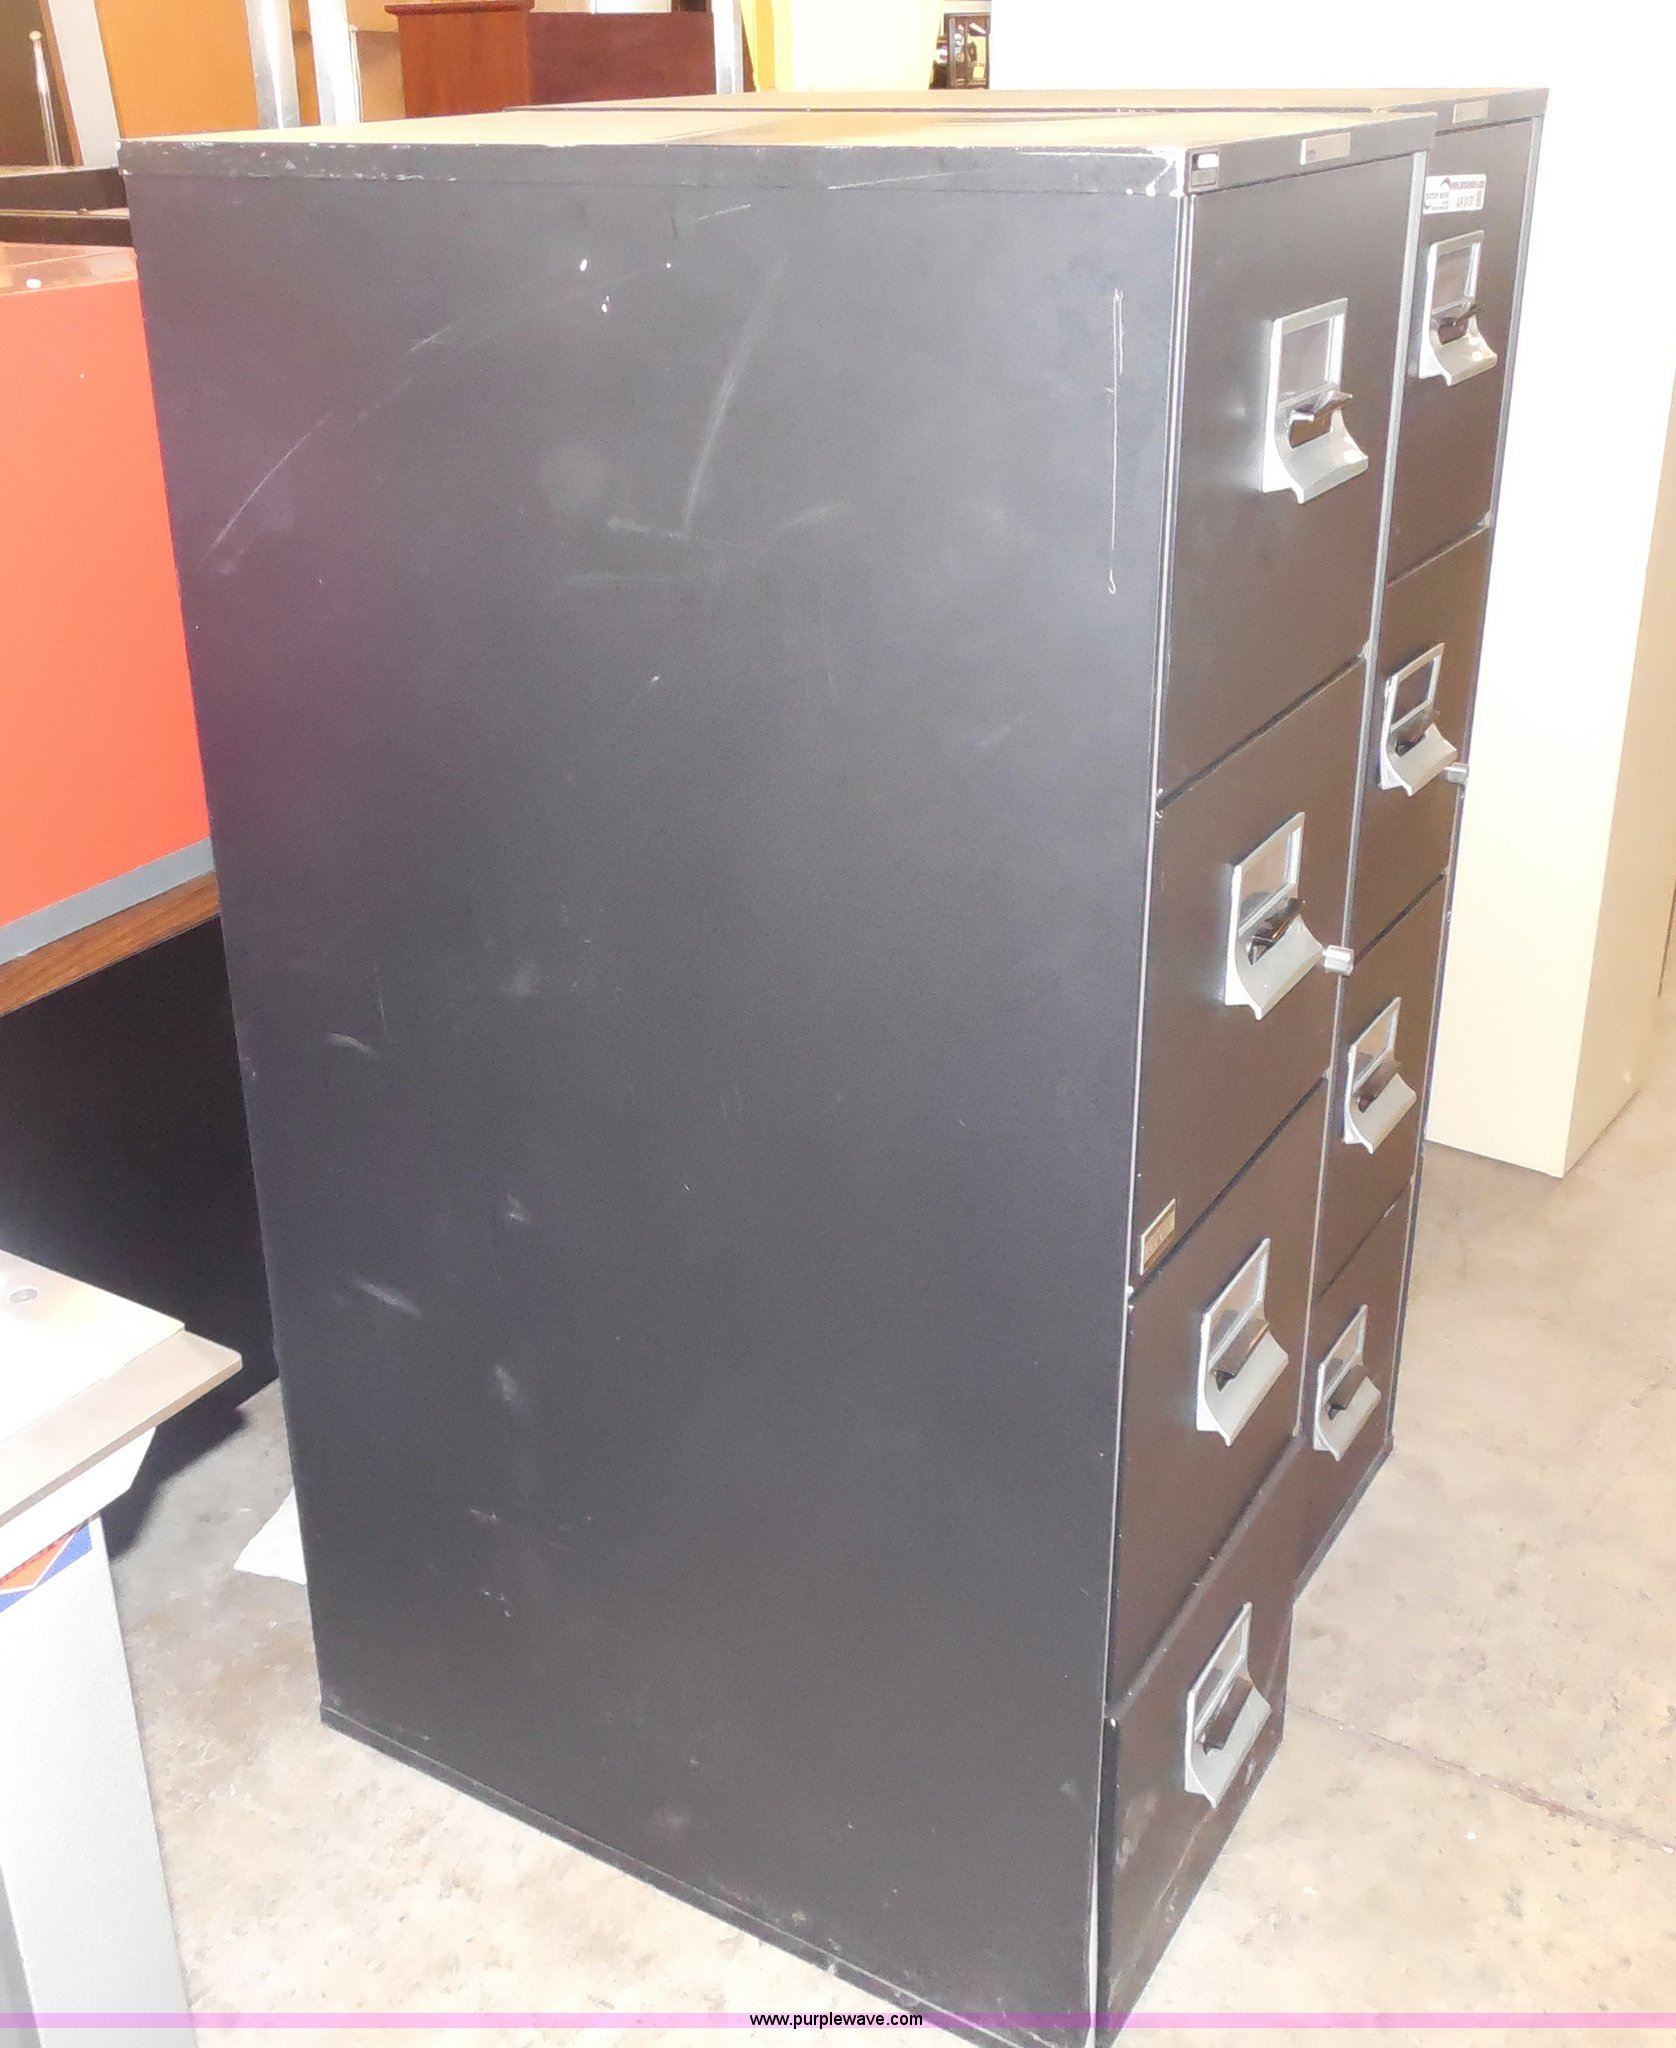 2 Victor Fire Master Lx File Cabinets Item Ar9183 Sold within size 1676 X 2048